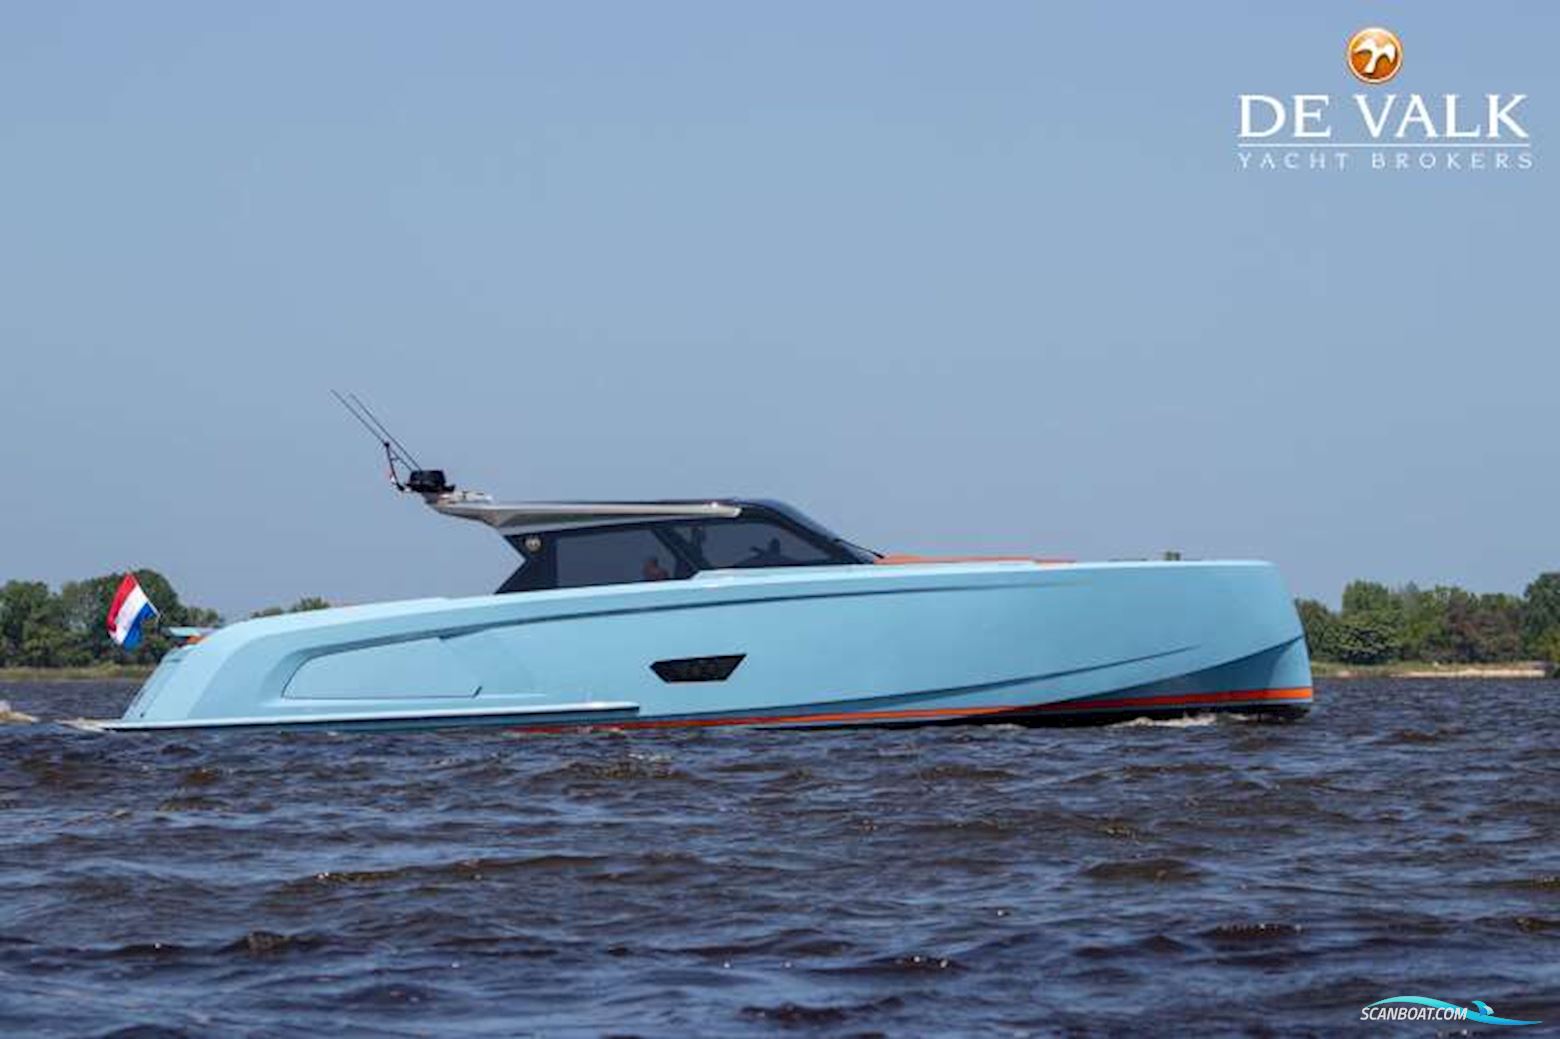 Vanquish VQ60 Motor boat 2019, with Man engine, The Netherlands